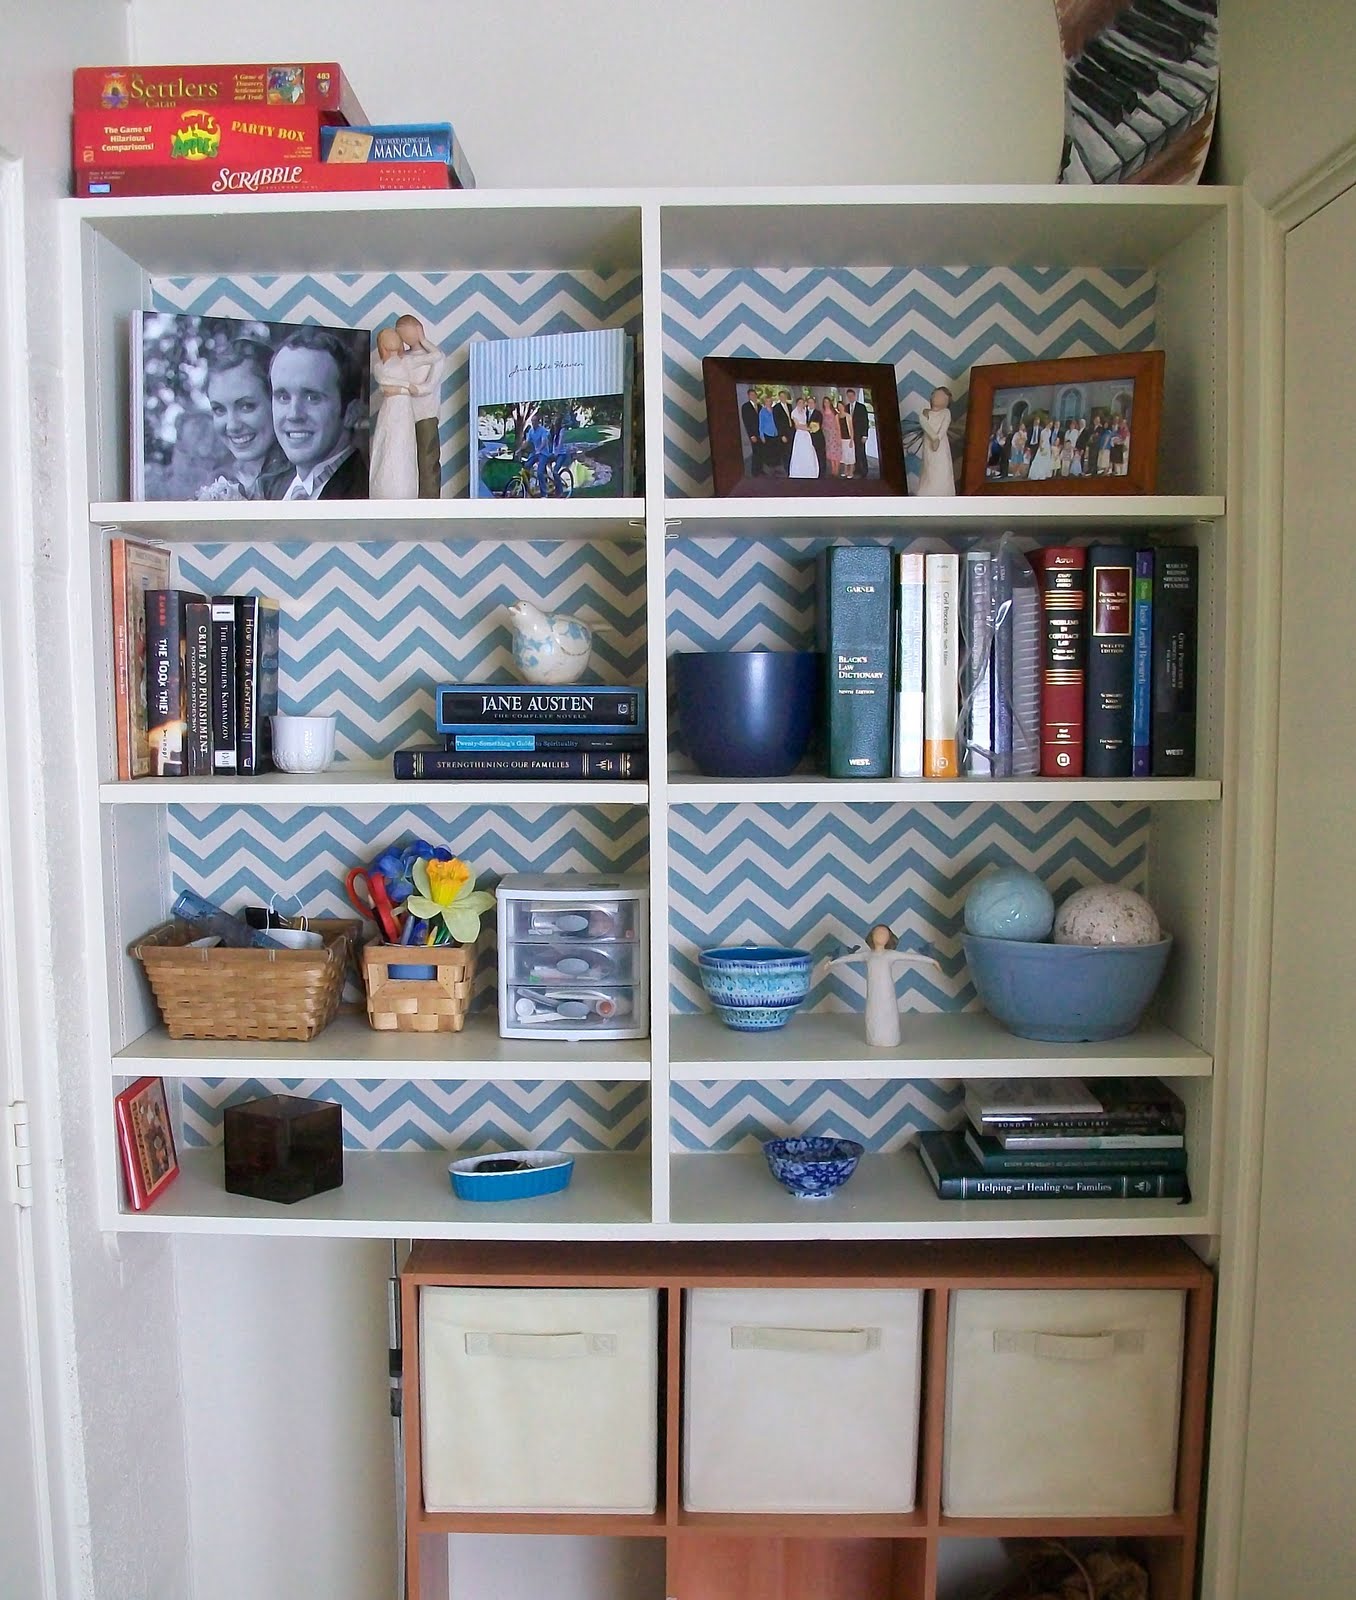 A bookcase with leftover blue and white chevron patterned wallpaper.